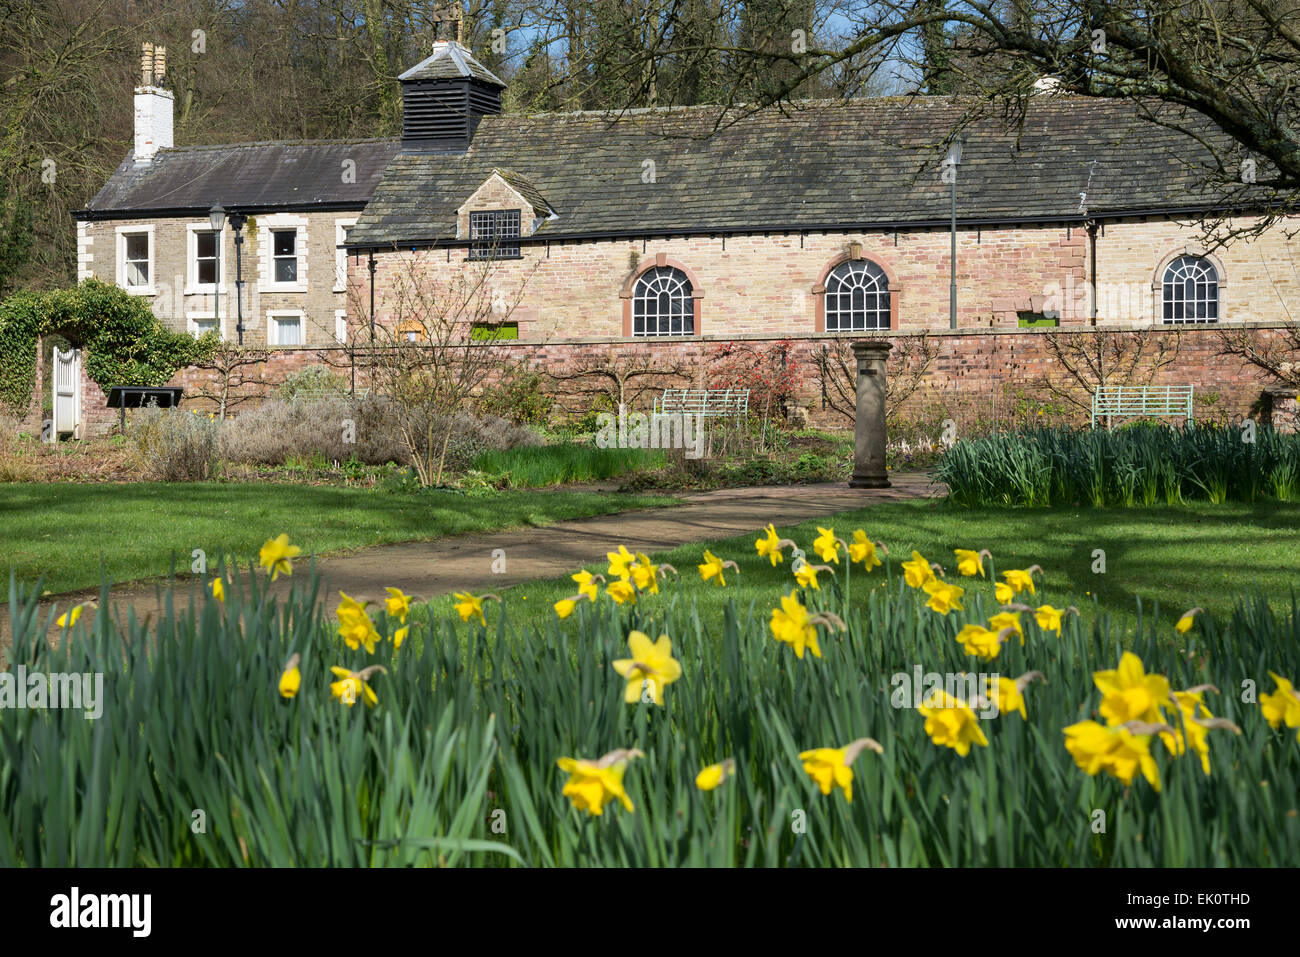 Chadkirk Chapel and walled garden near Romiley, Stockport. A sunny spring morning. Stock Photo